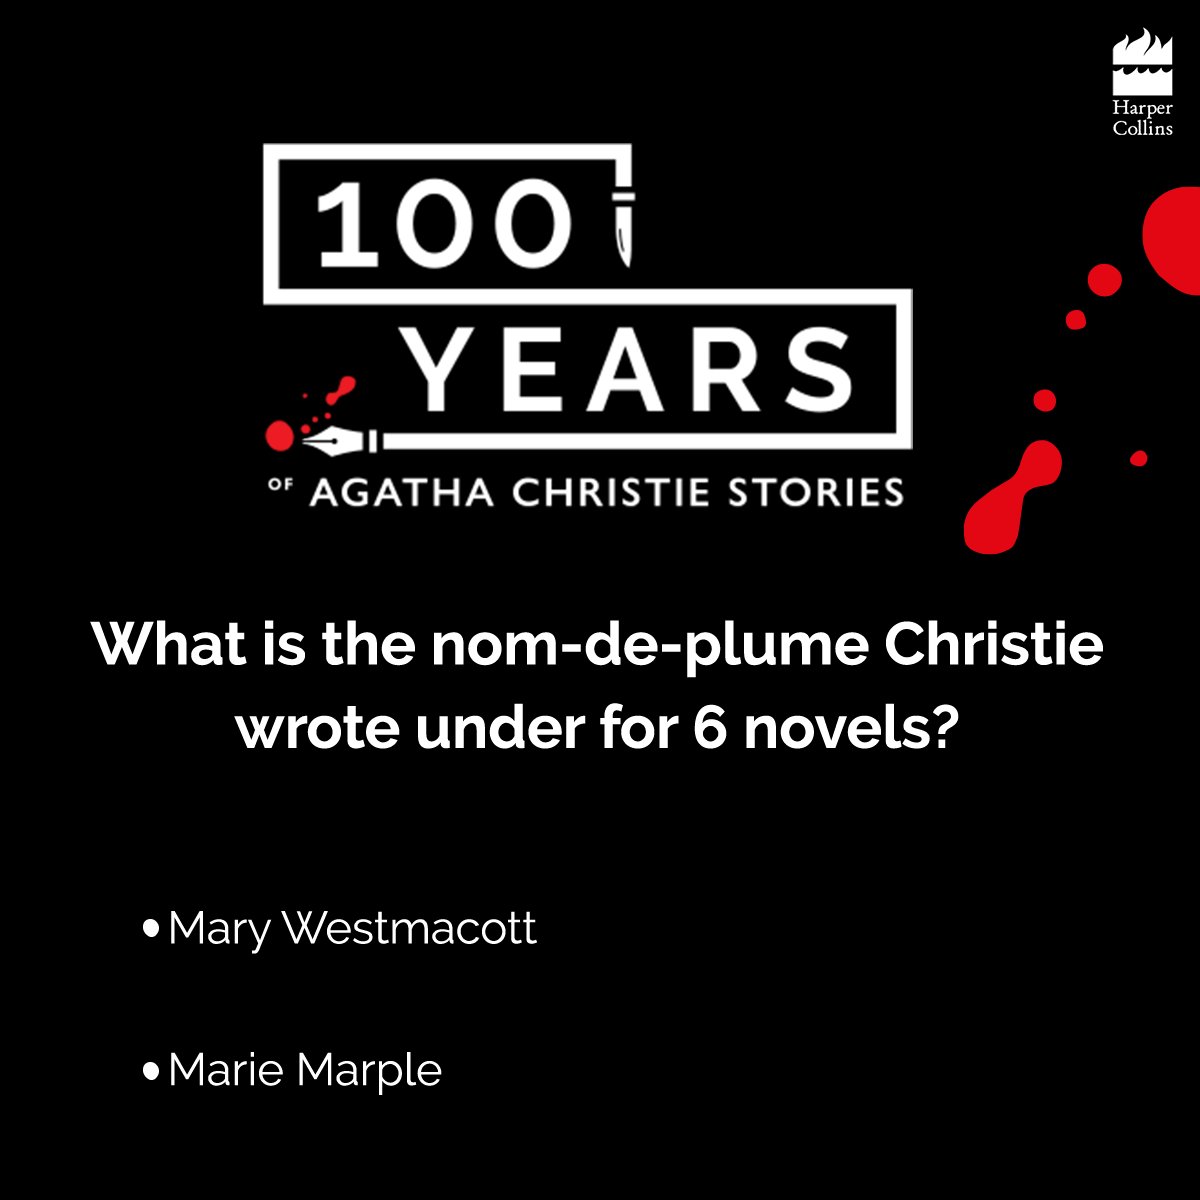 #ContestAlert
Leave your answers in the comments below. Just two more questions to go! #100YearsOfChristie #Quiz
@agathachristie